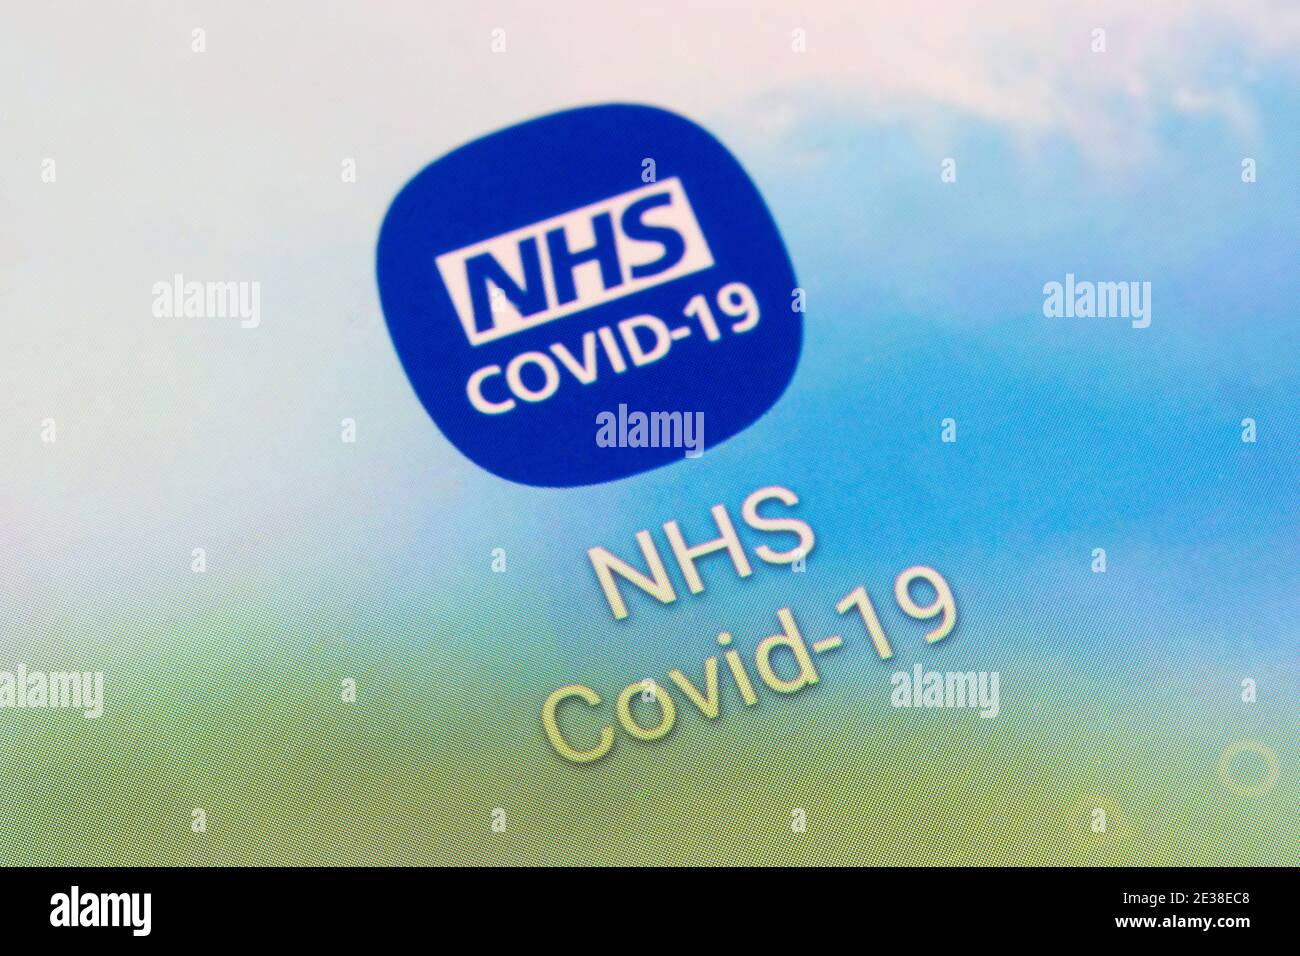 A closeup of the app logo for the NHS COVID-19 contact tracing app for monitoring the spread of the COVID-19 pandemic in England and Wales Stock Photo